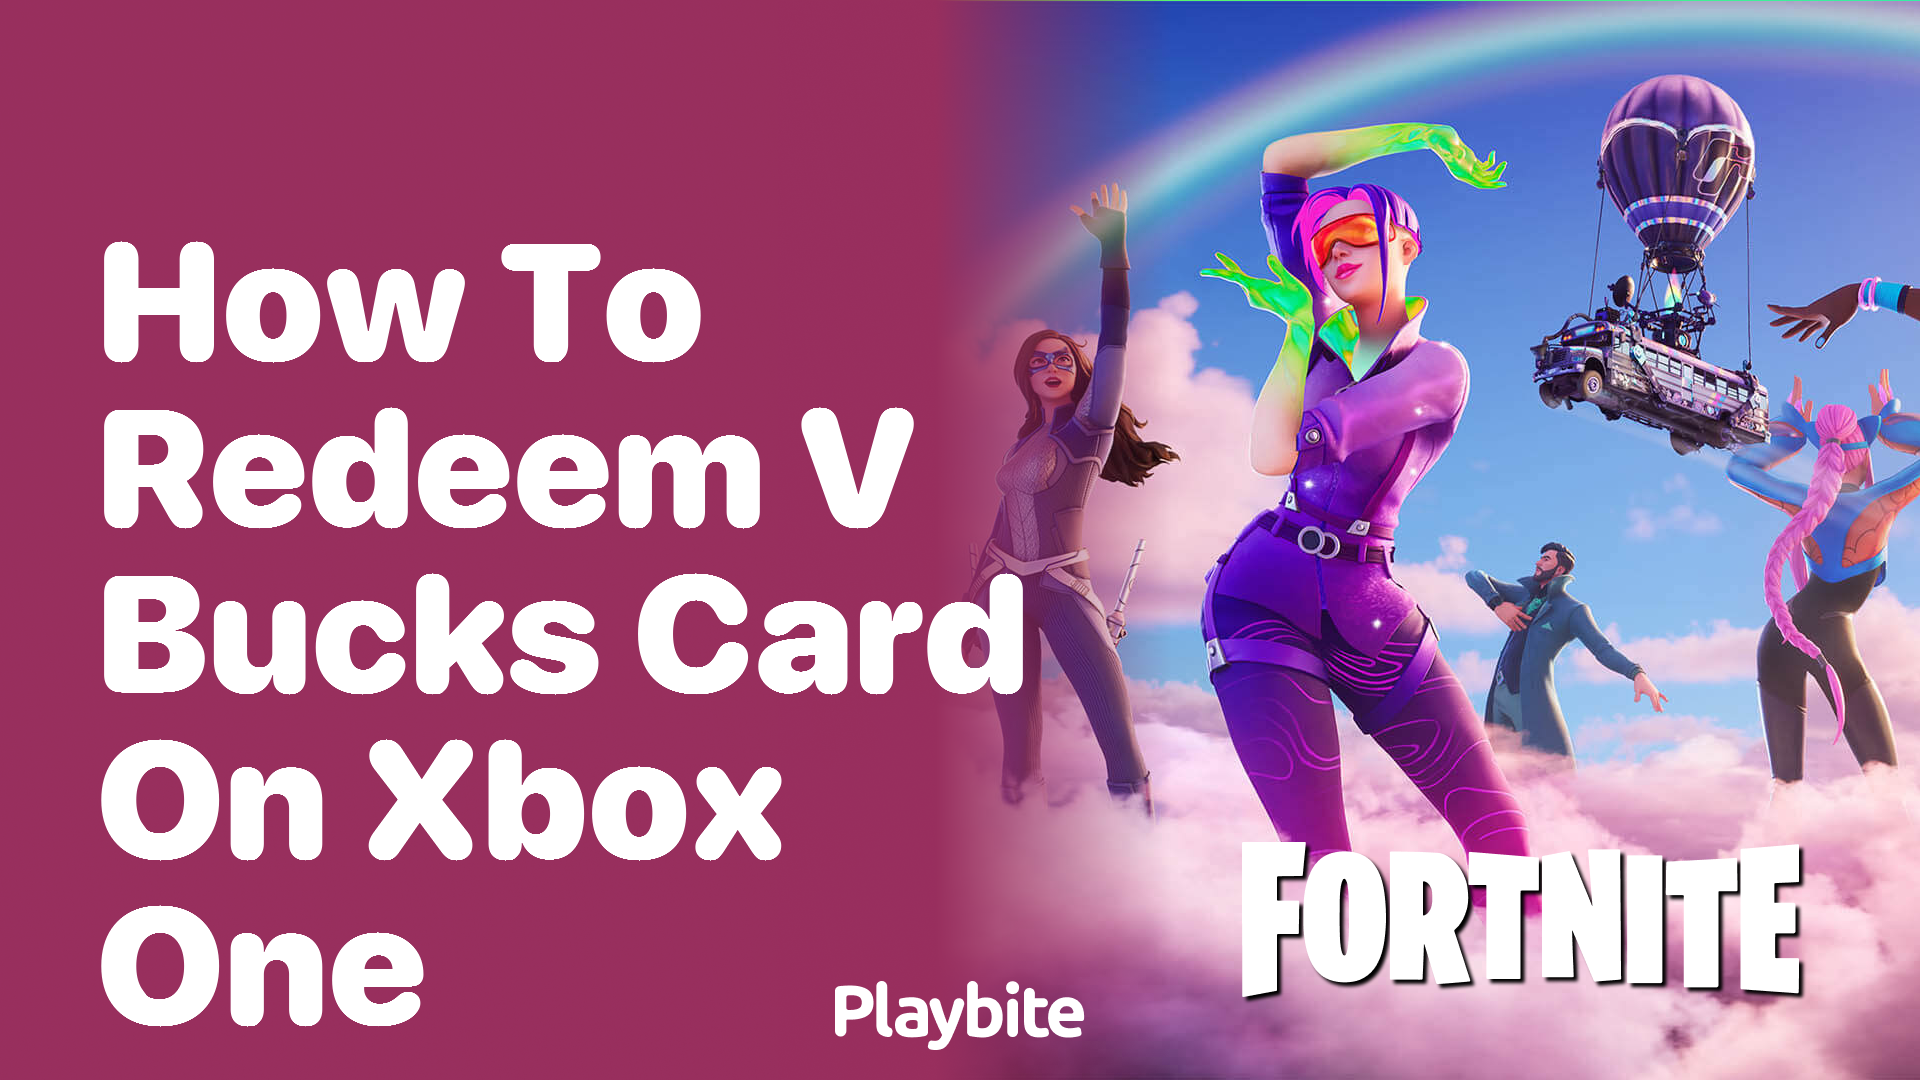 Xbox is giving aways gift cards atm : r/xboxone